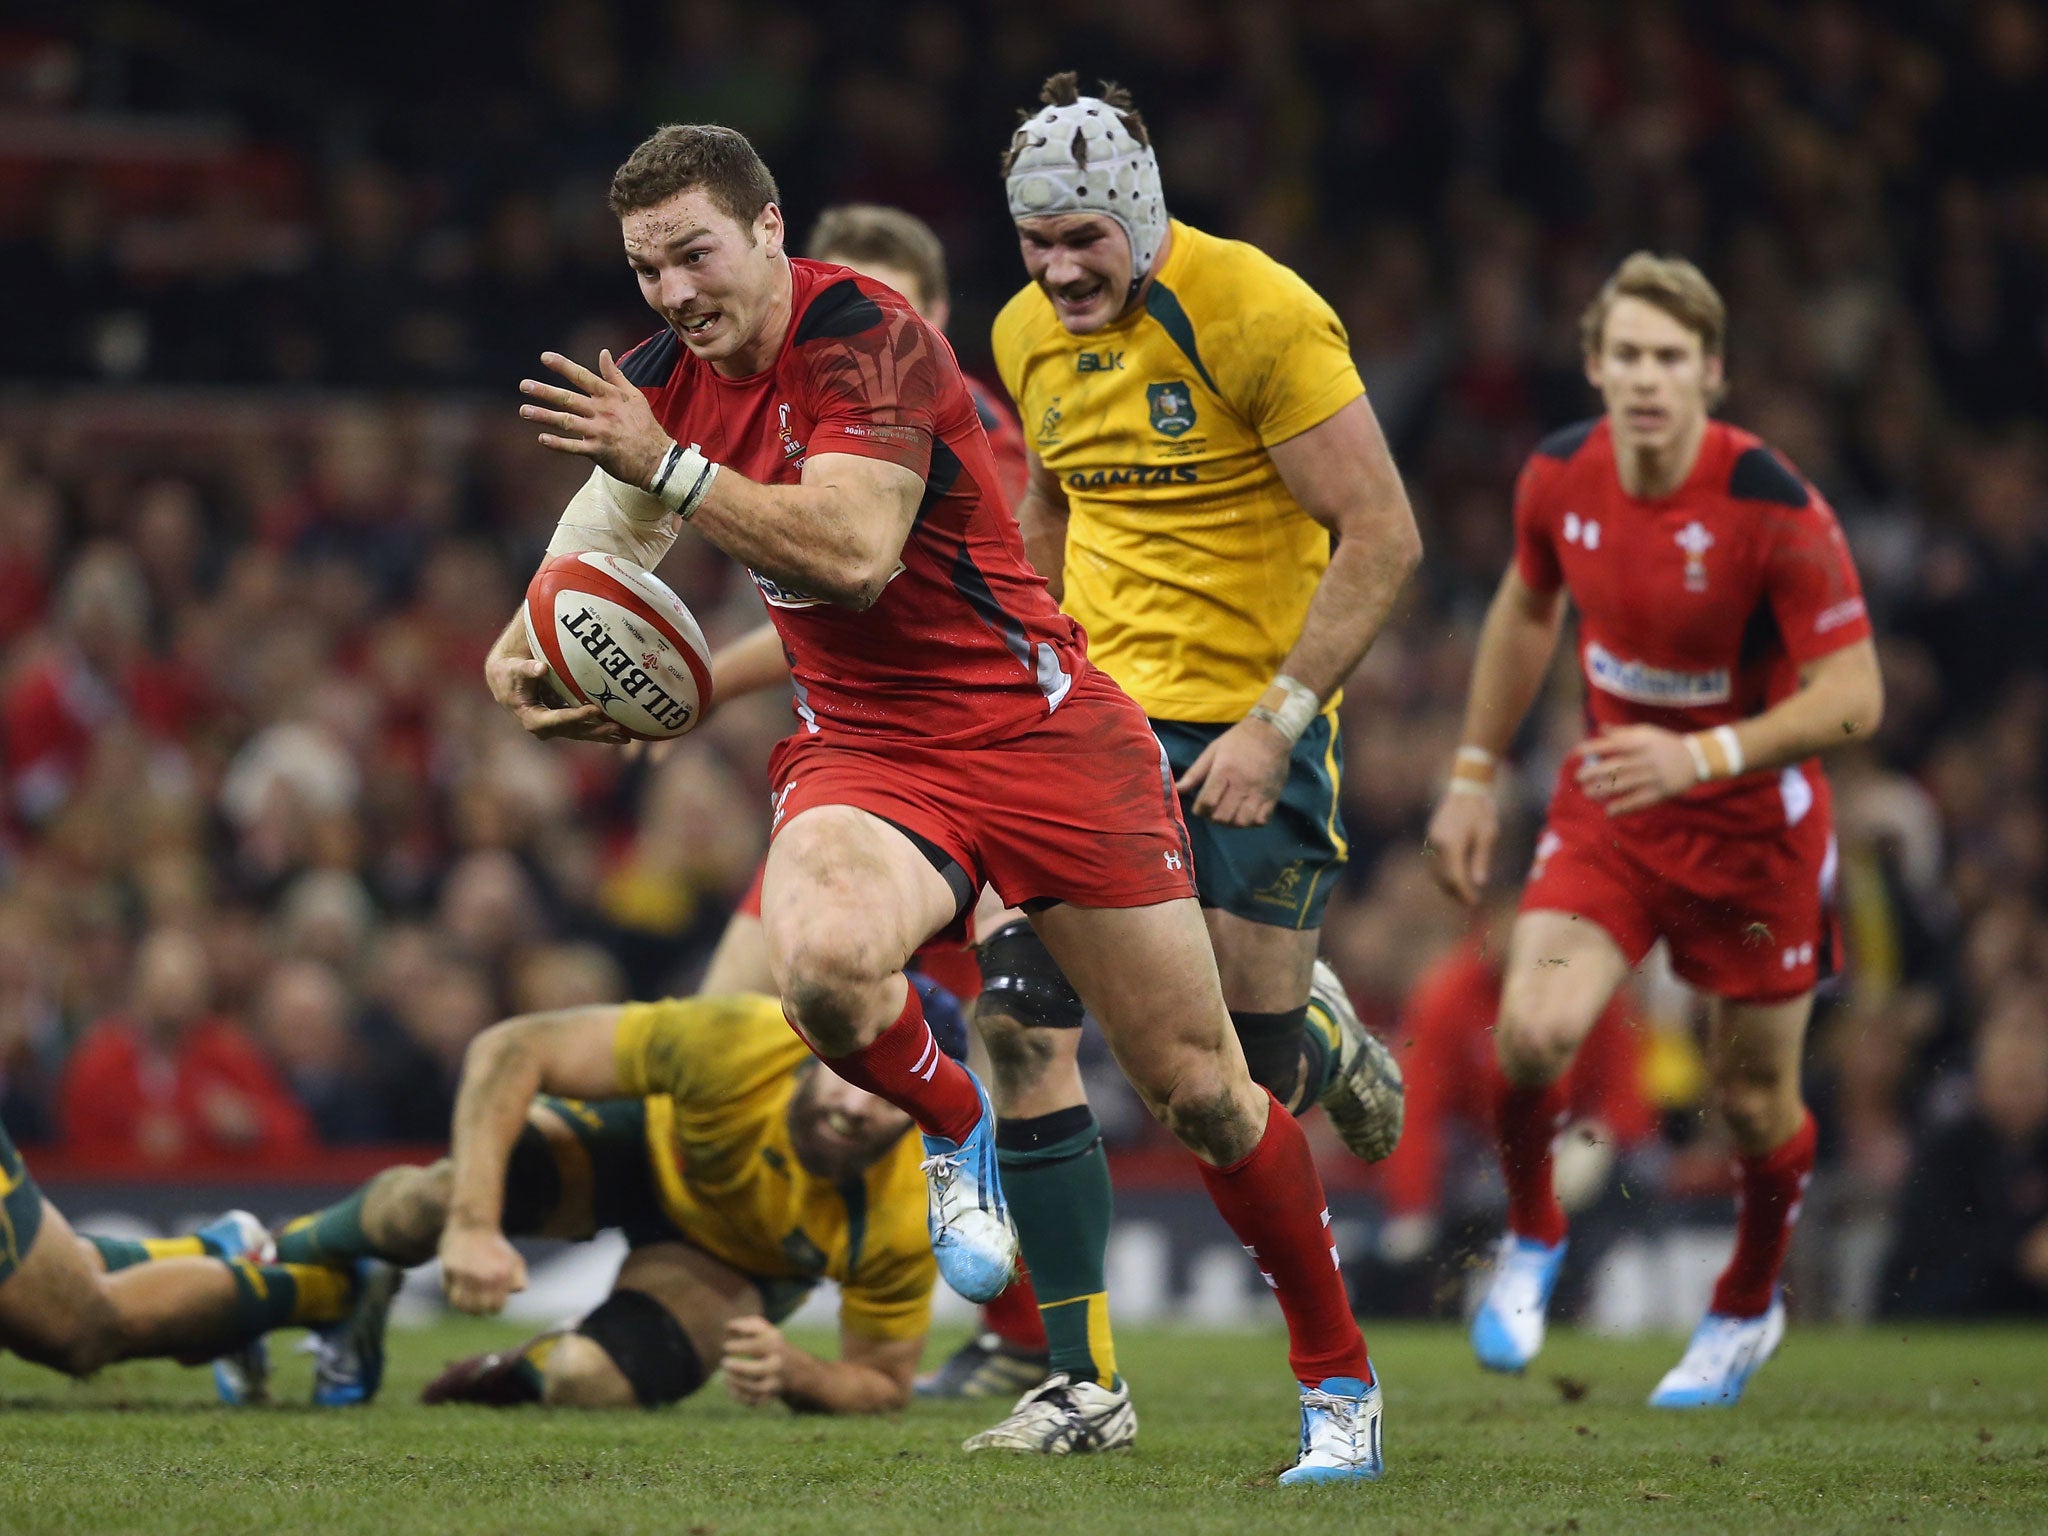 Northampton Saints wing George North remains intent on playing for Wales whenever possible despite recent £60,000 fine